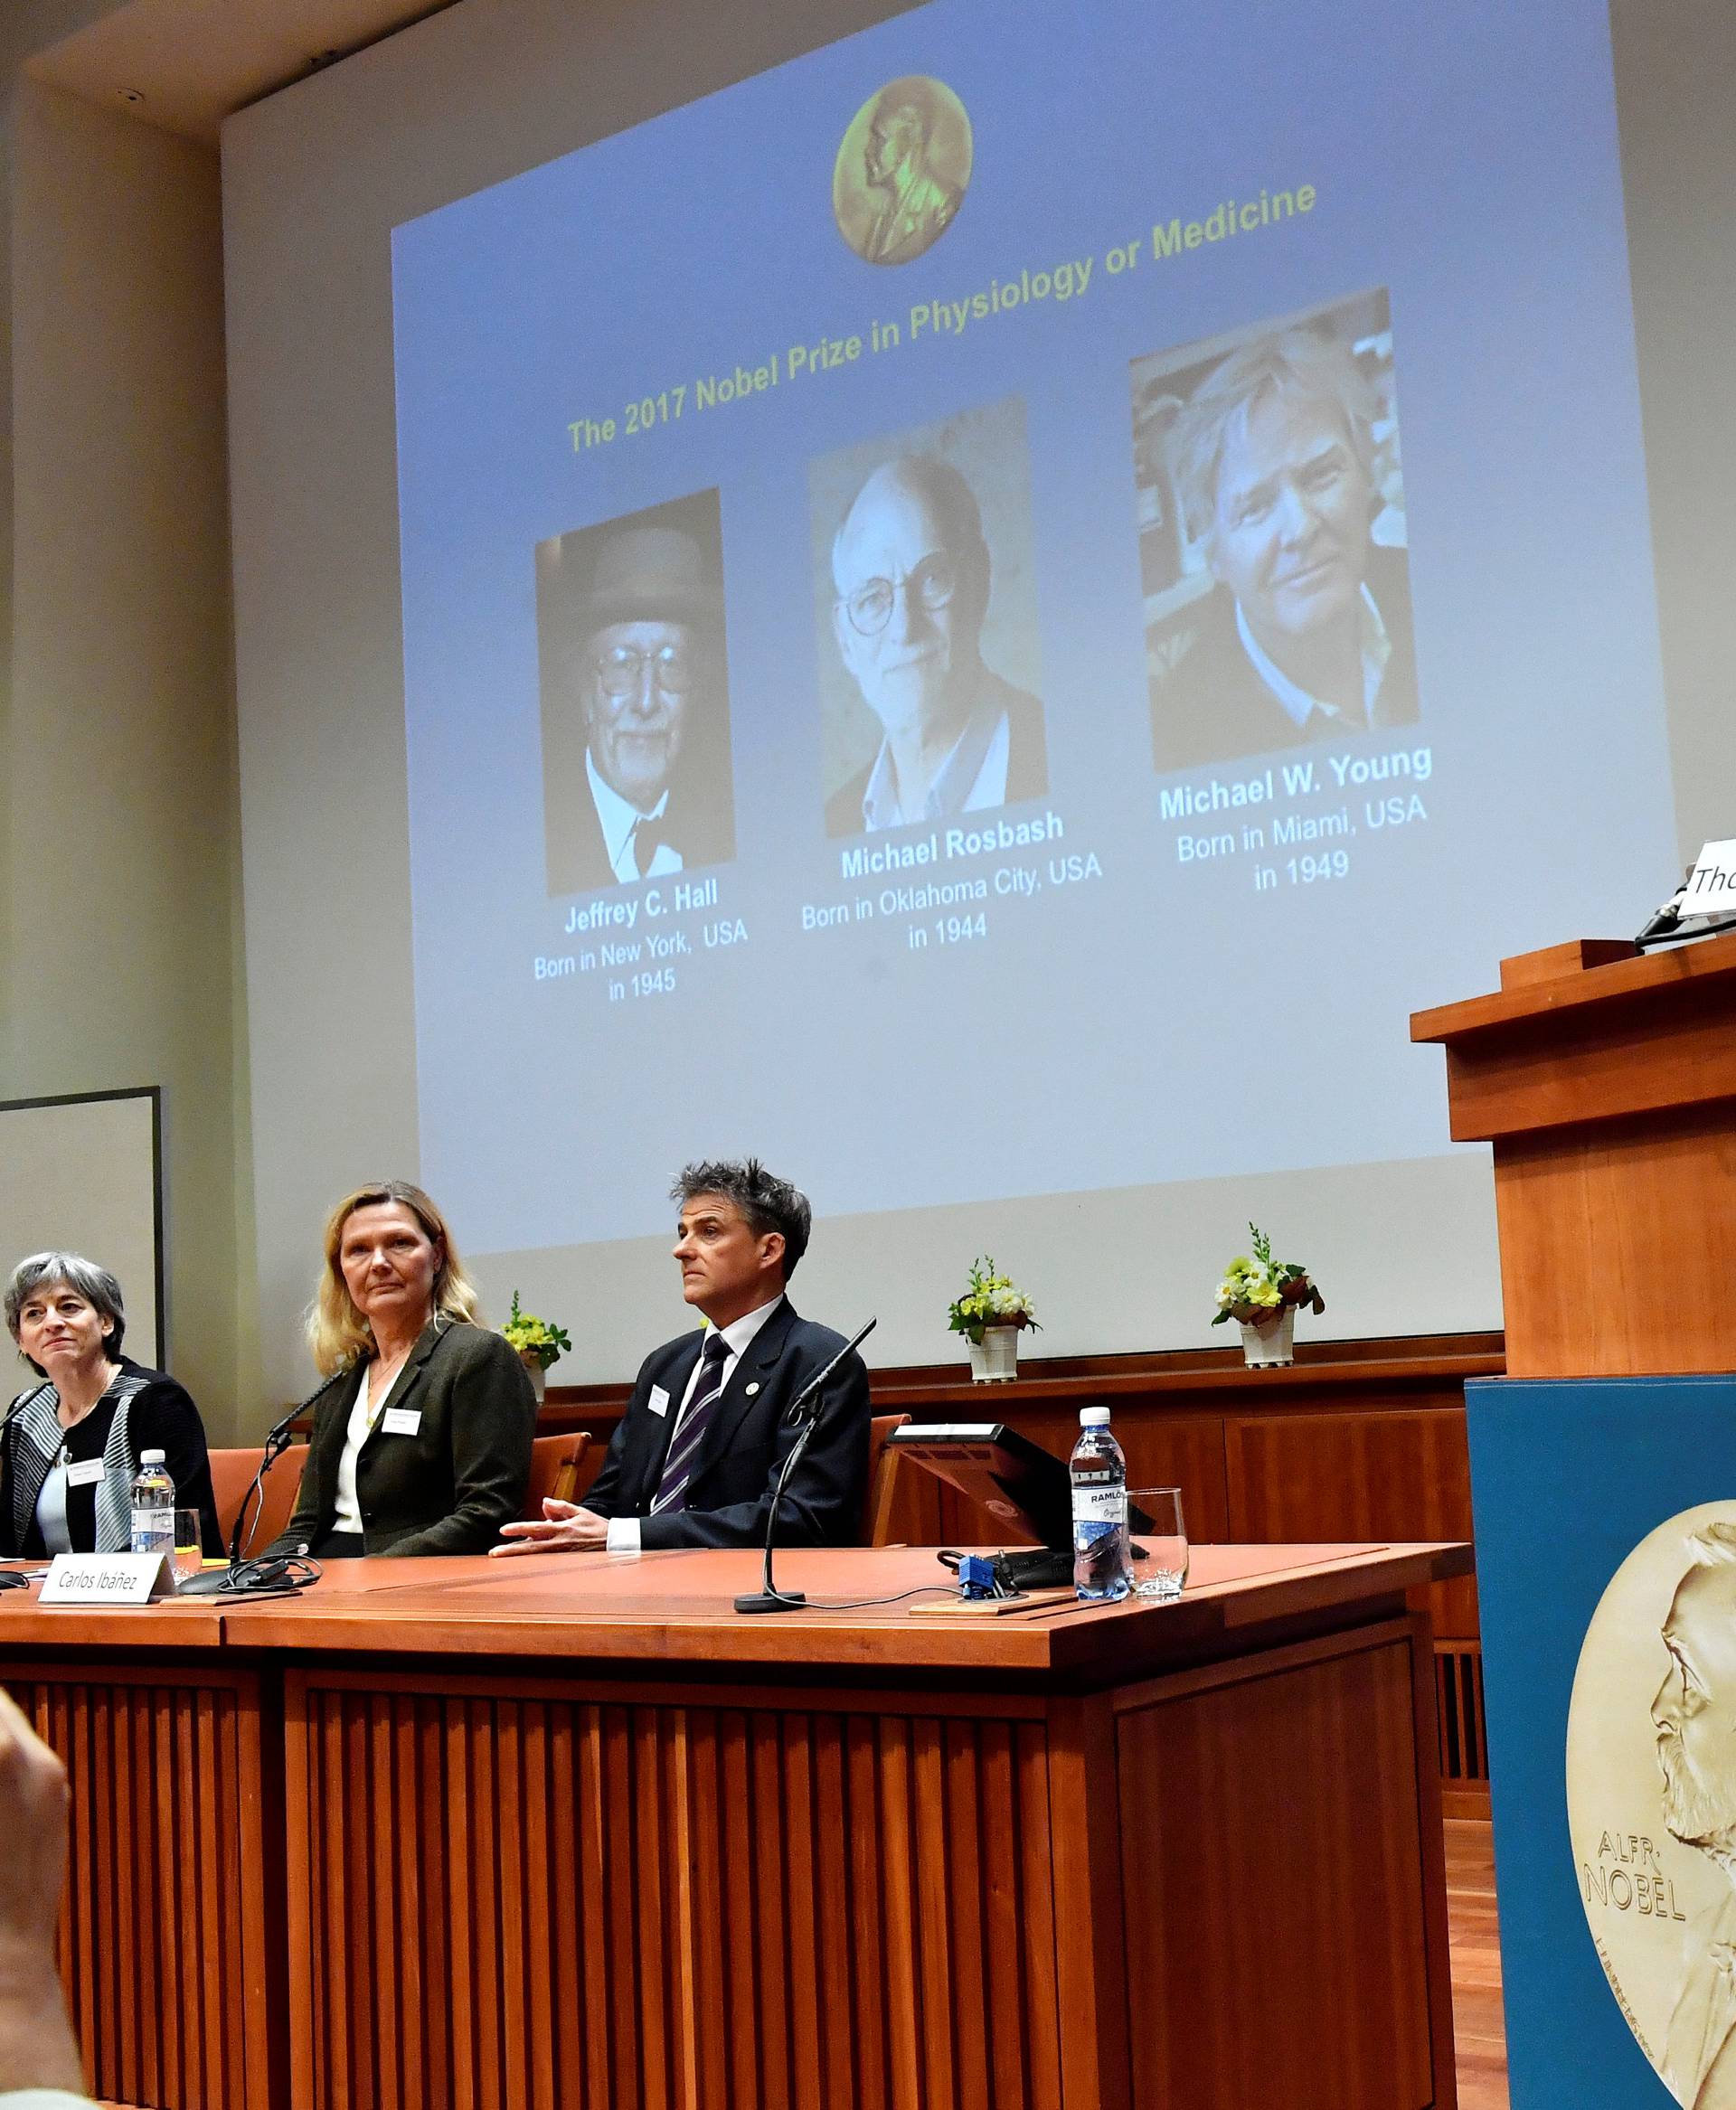 Thomas Perlmann, Secretary of the Nobel Committee for Physiology or Medicine, announces the names of Jeffrey C. Hall, Michael Rosbash and Michael W. Young  as winners of the 2017 Nobel Prize in Physiology or Medicine